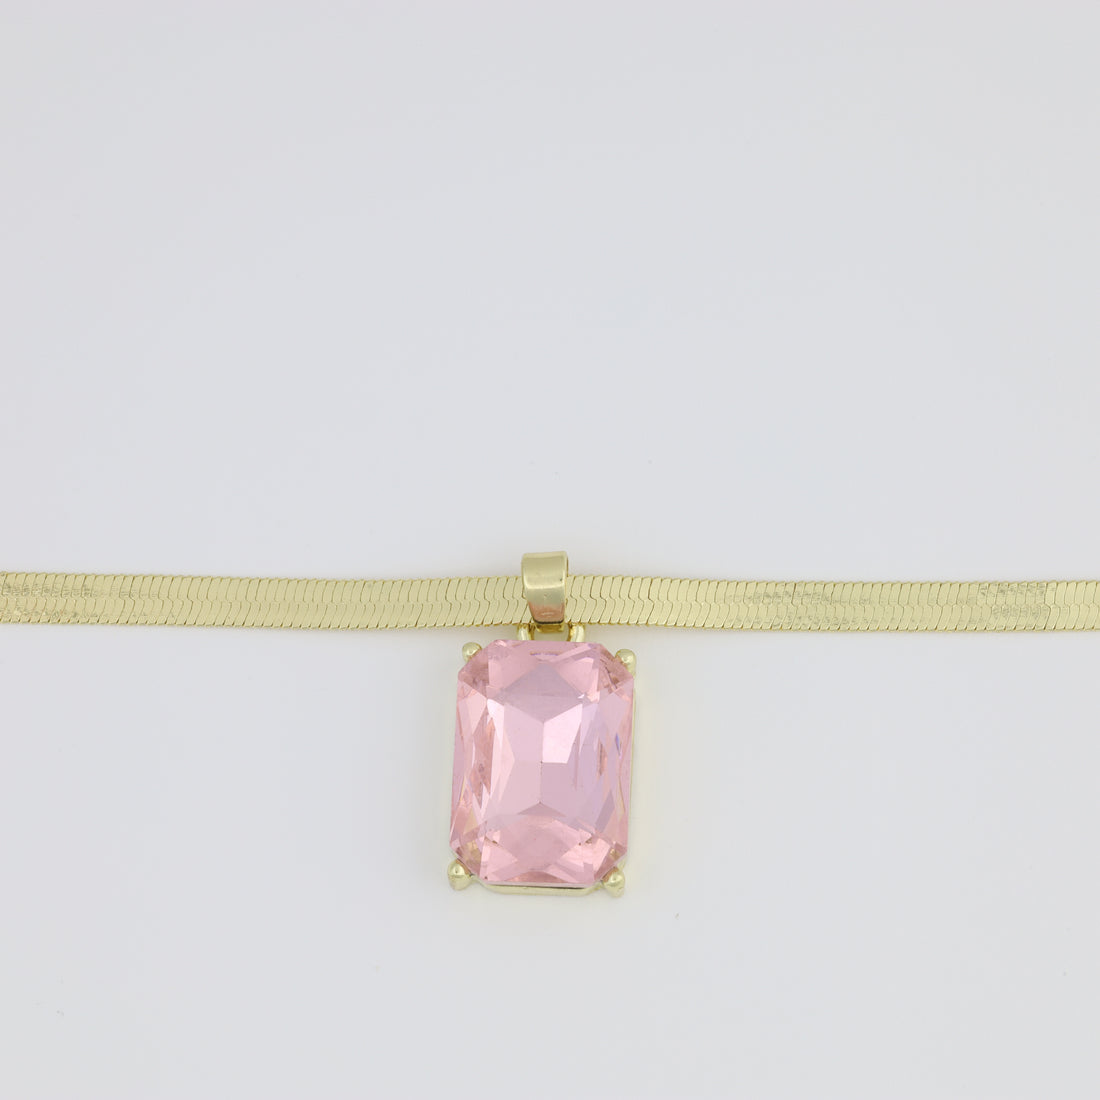 Necklace with herringbone link and pink stone